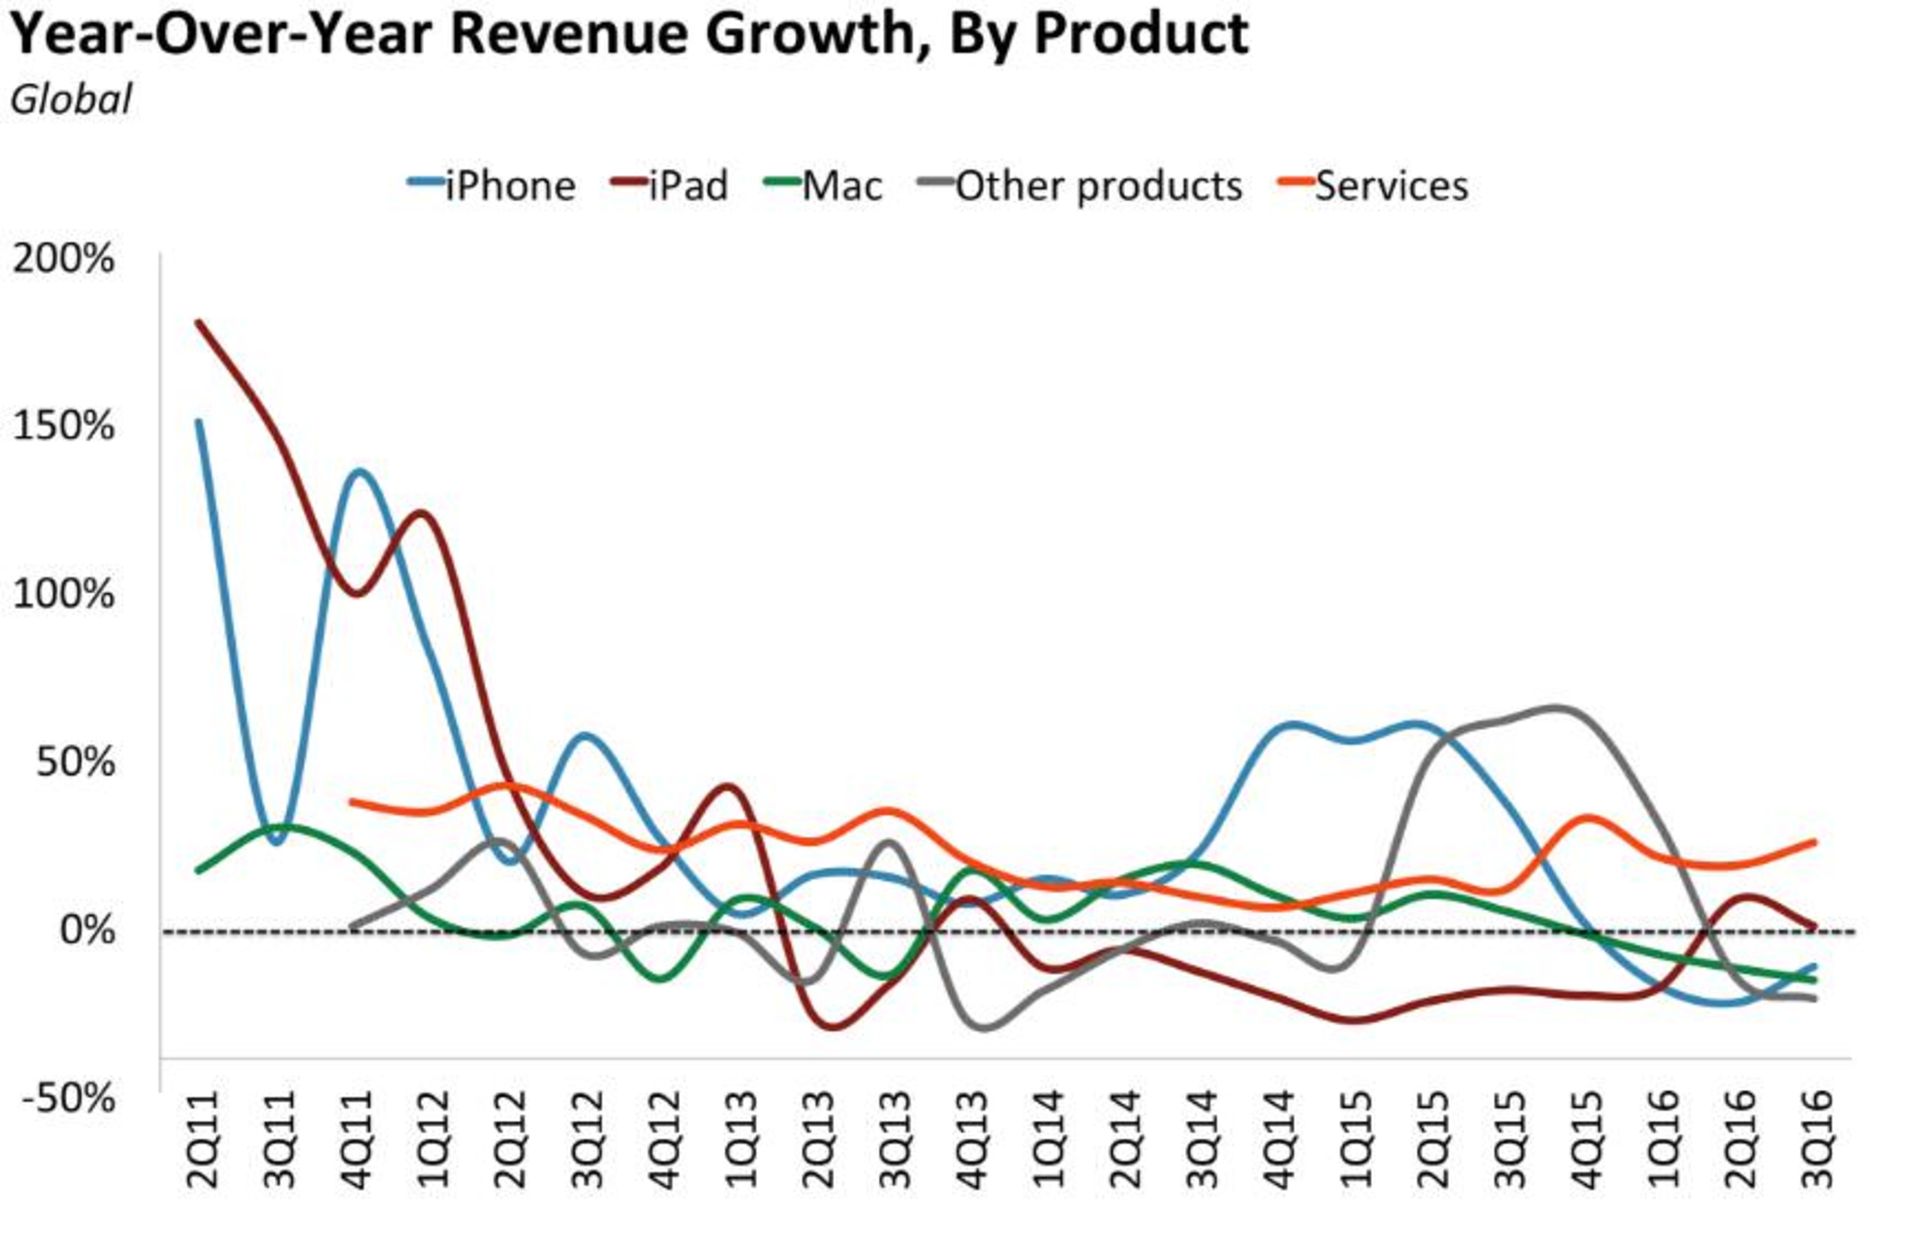 bii apple quarterly revenue growth by product 3q16